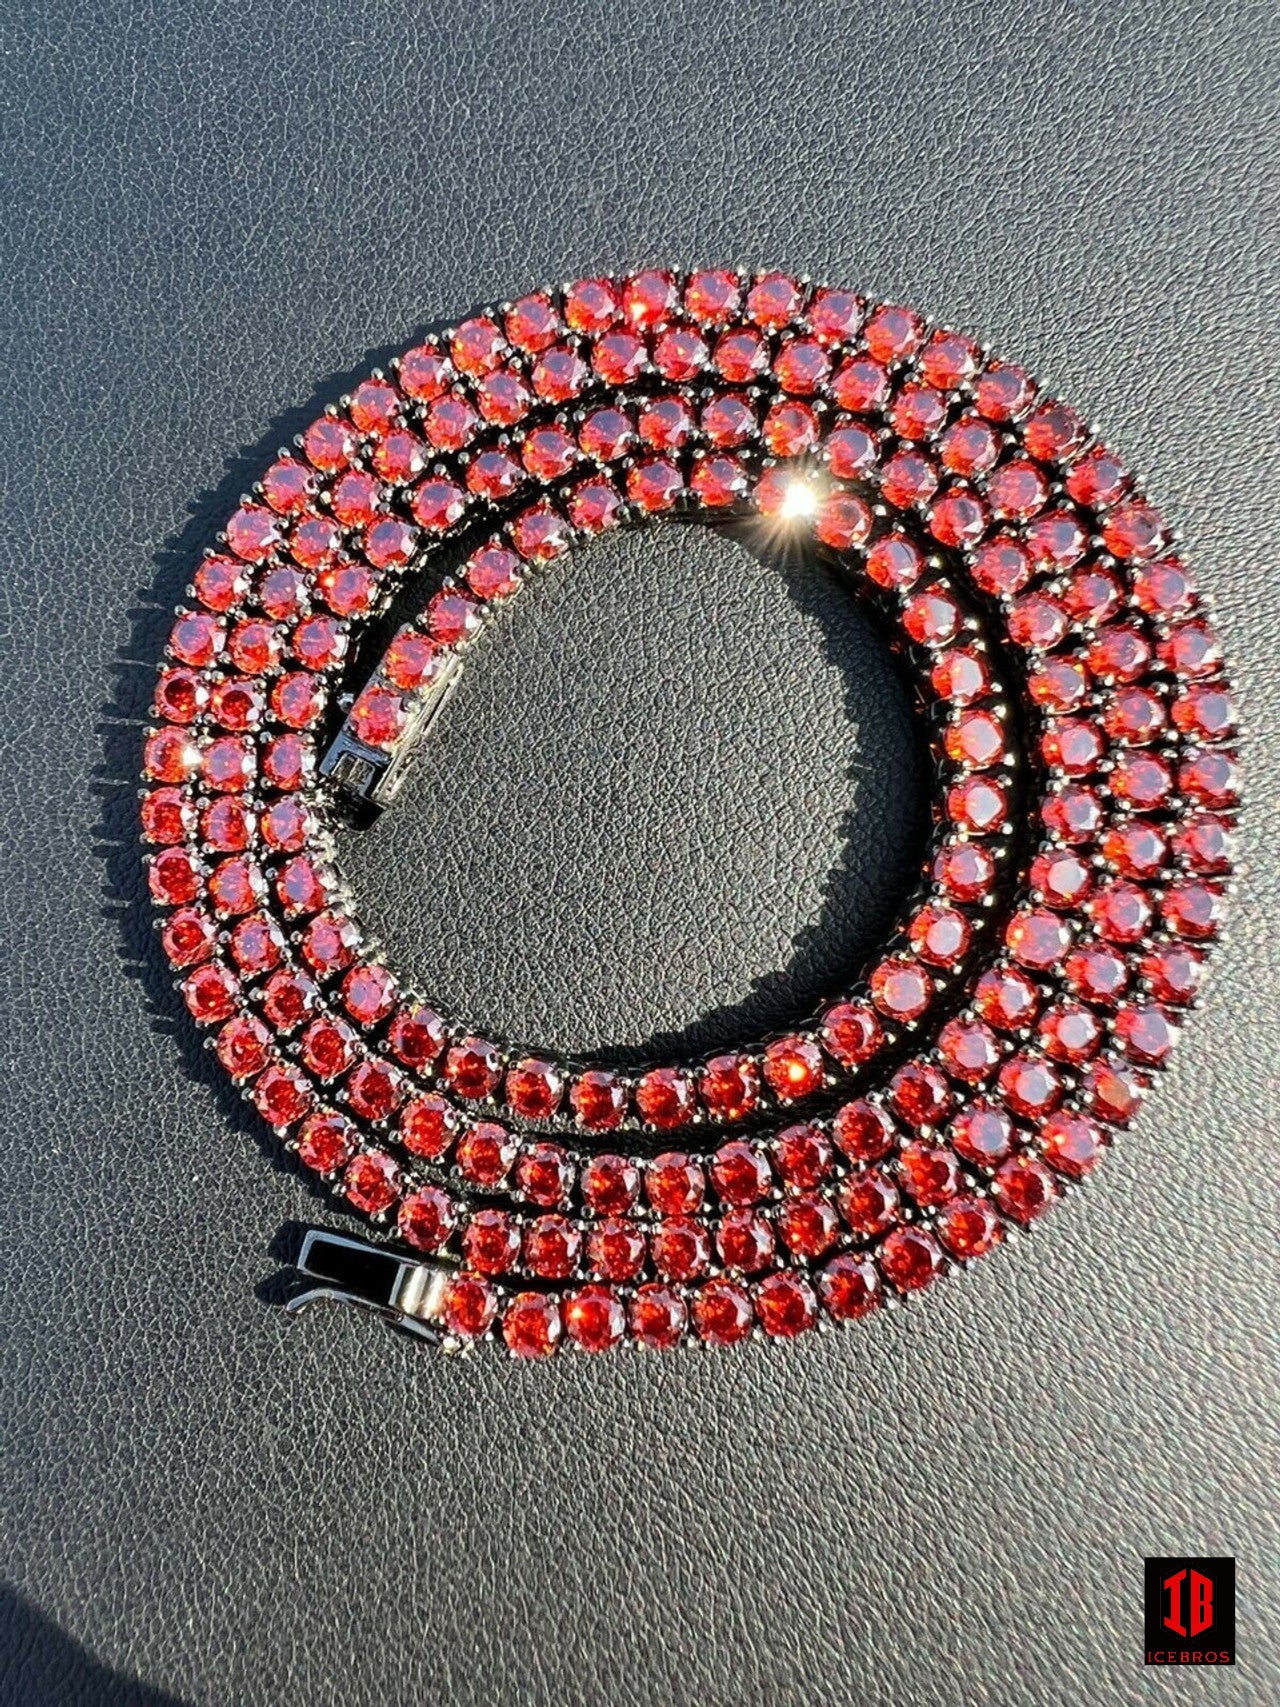 Tennis Chain Fine 925 Sterling Silver Red Ruby Diamond Necklace 16-28" 3mm Iced